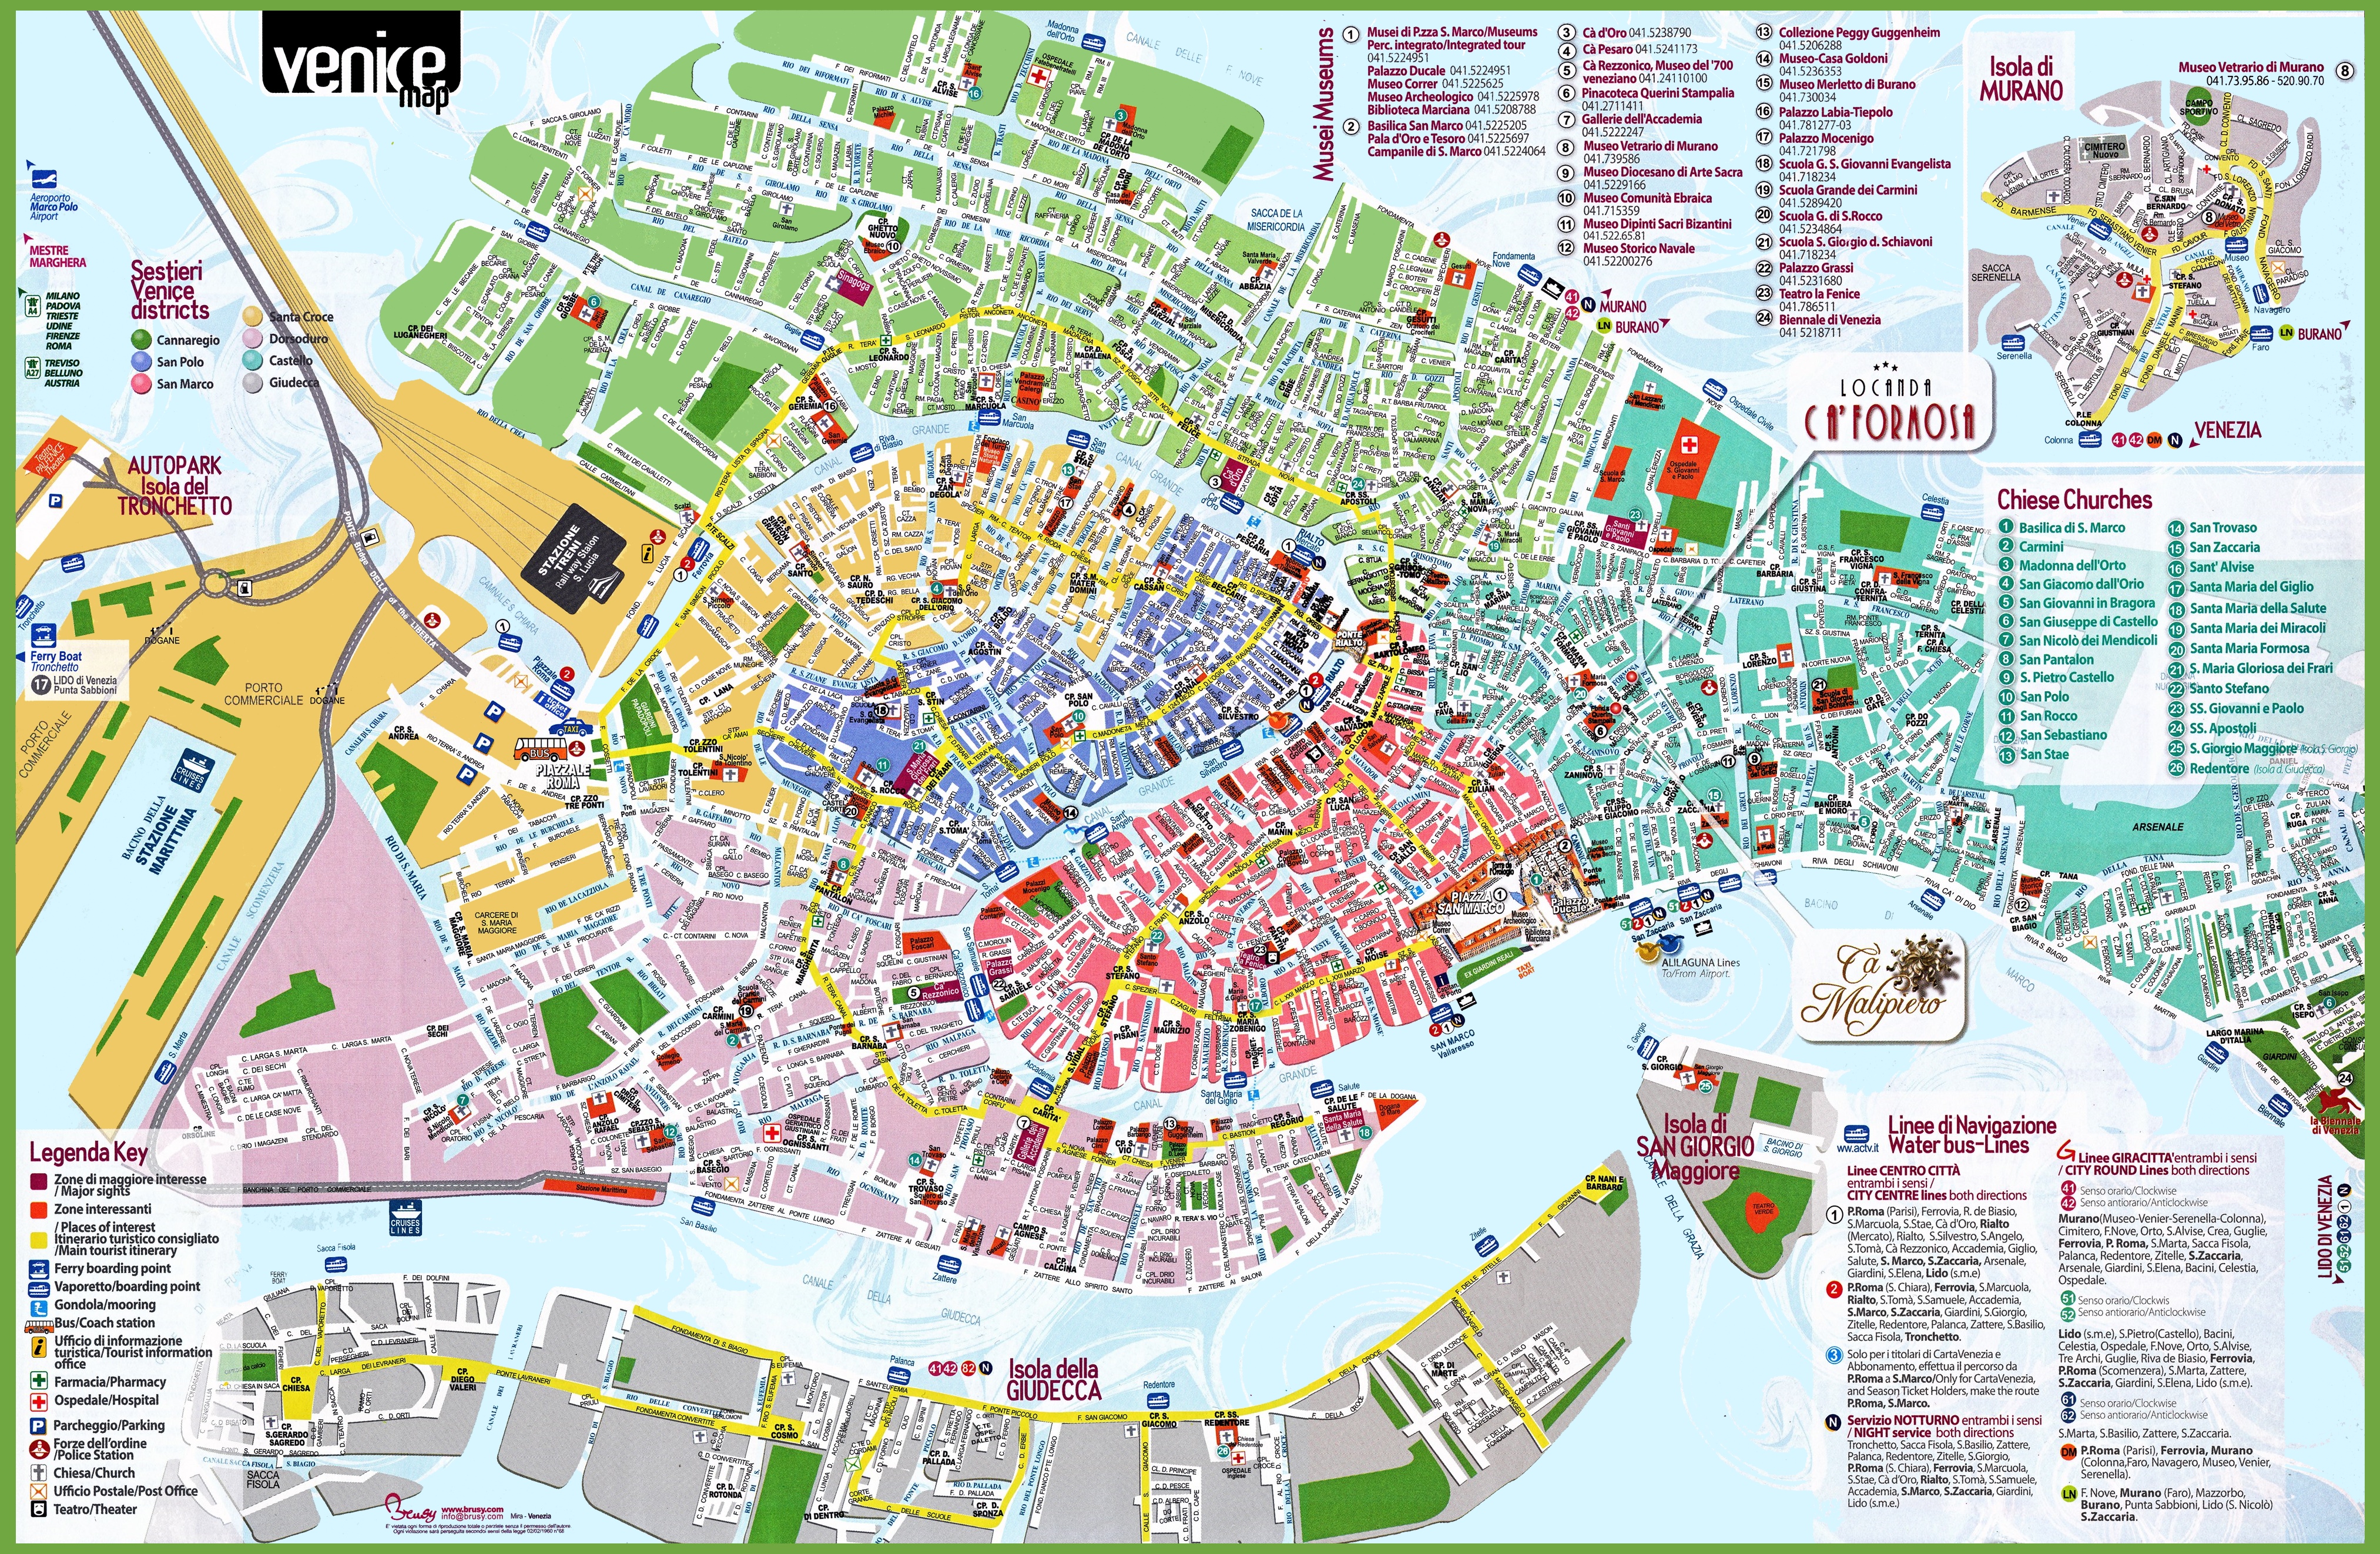 Venice Tourist Attractions Map